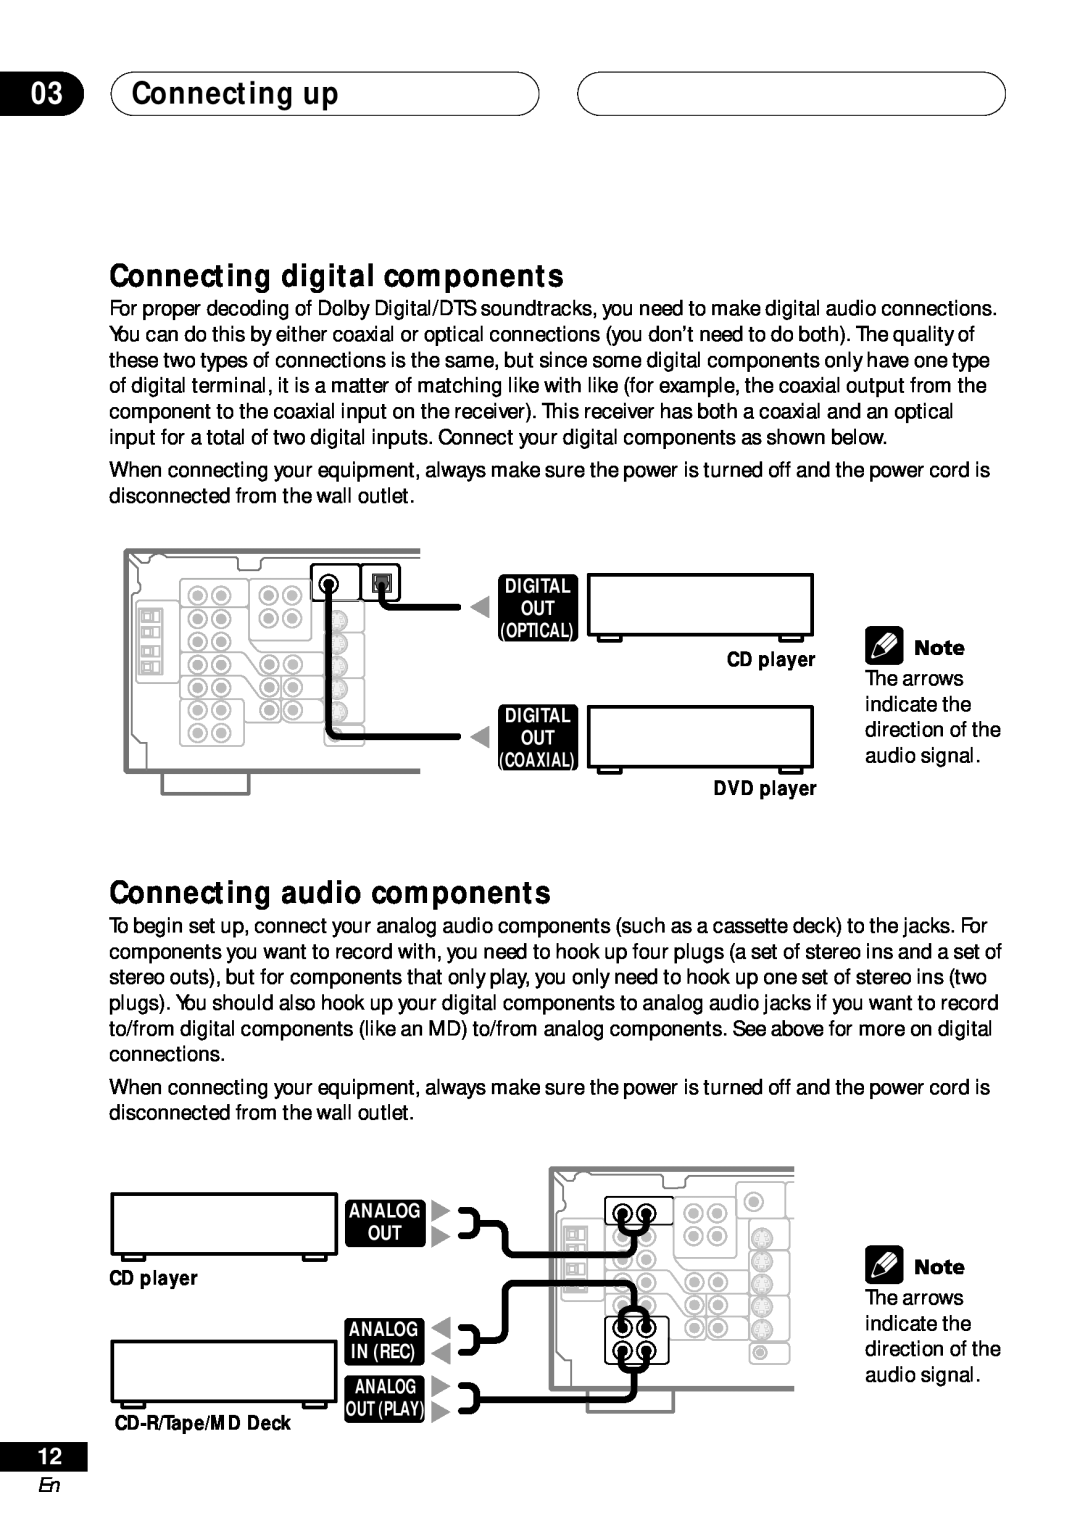 Pioneer VSX-D411 operating instructions Connecting up Connecting digital components, Connecting audio components 